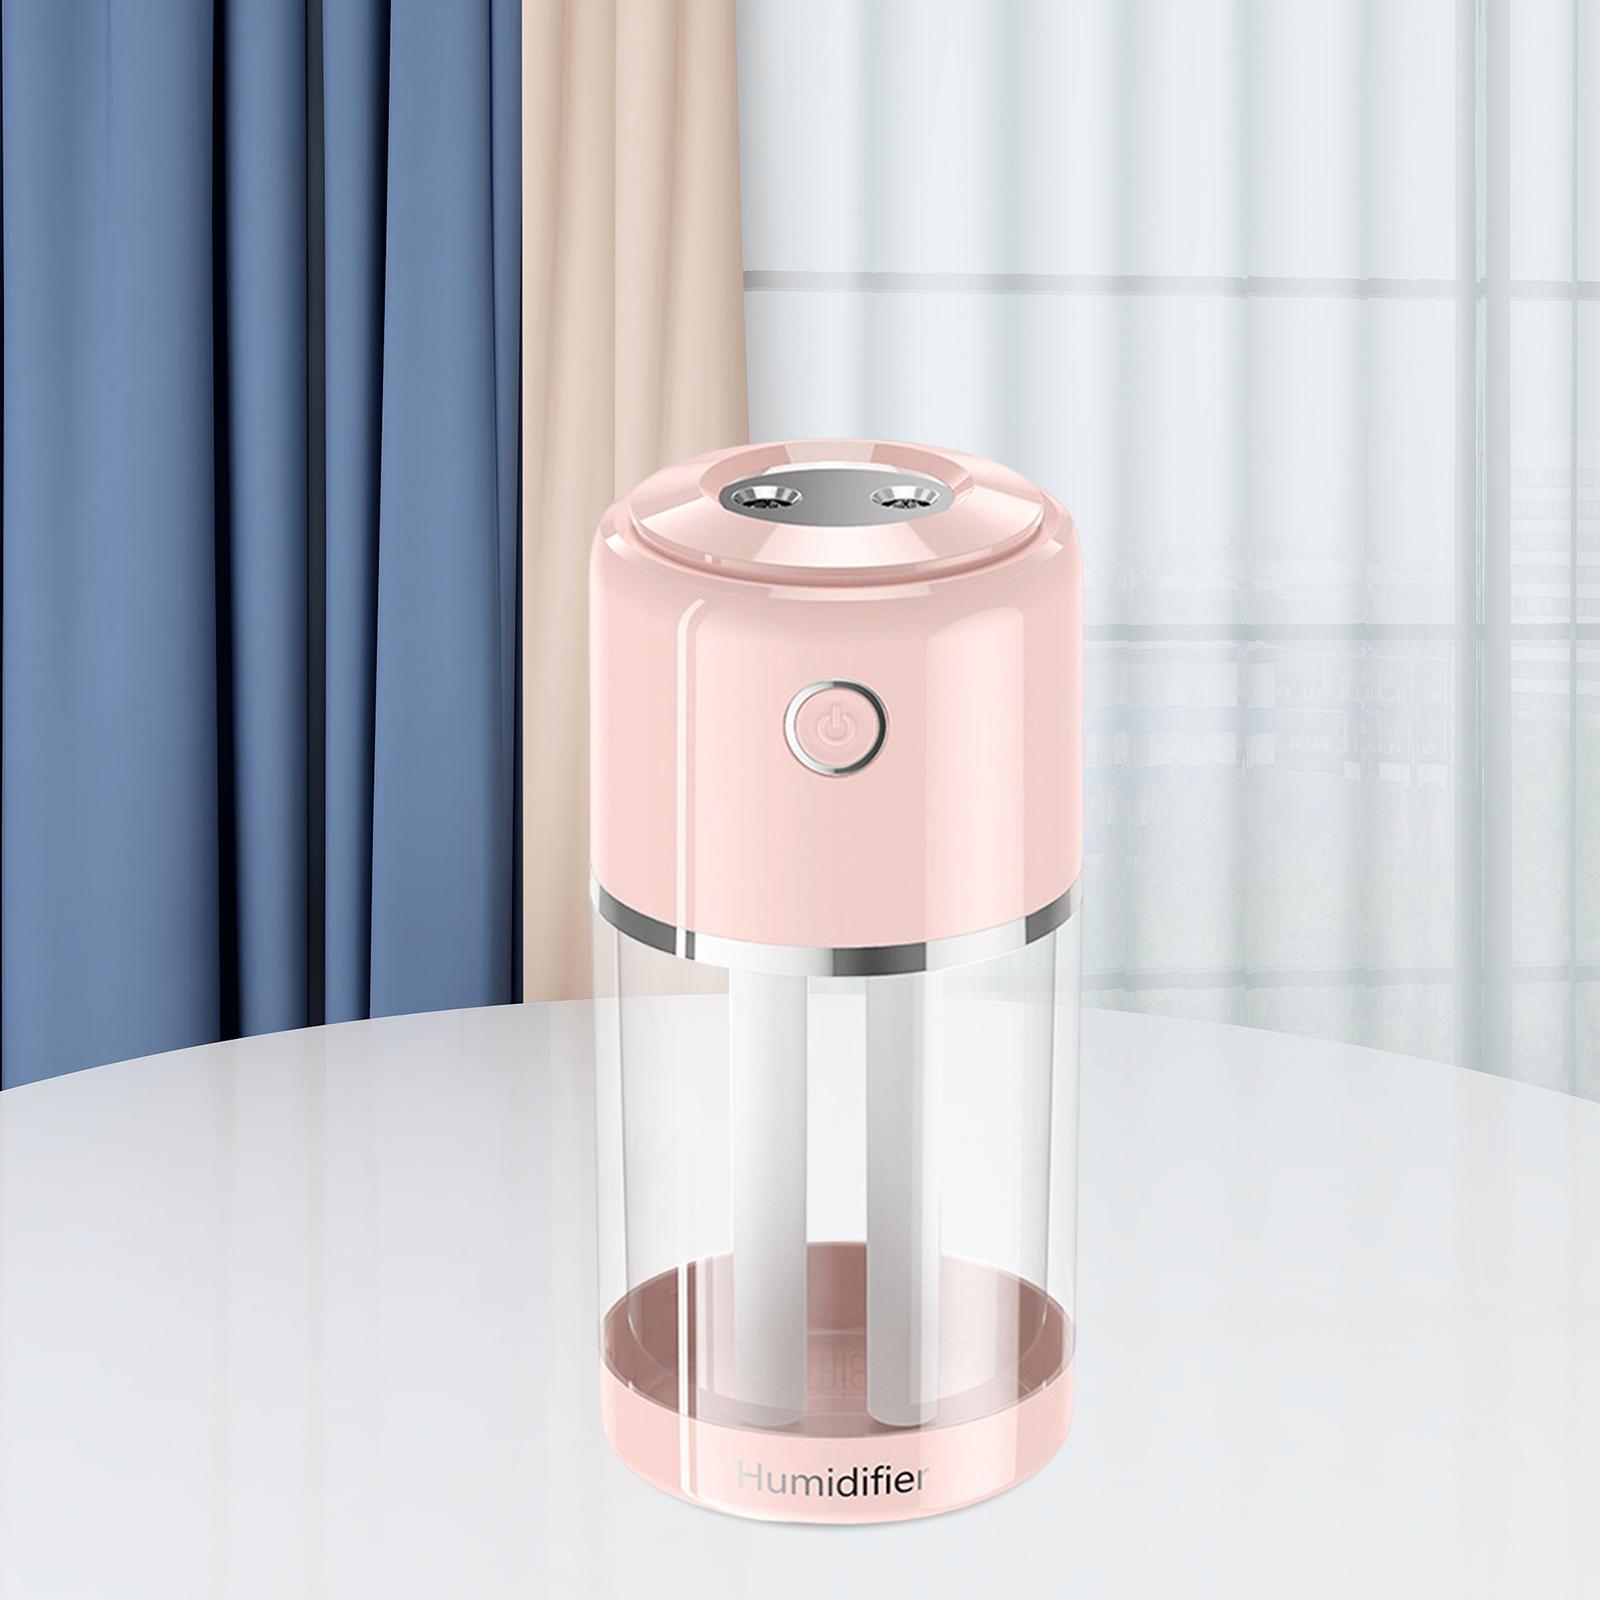 Household Humidifier Large Capacity Quiet for Household Bedroom NightStand Pink